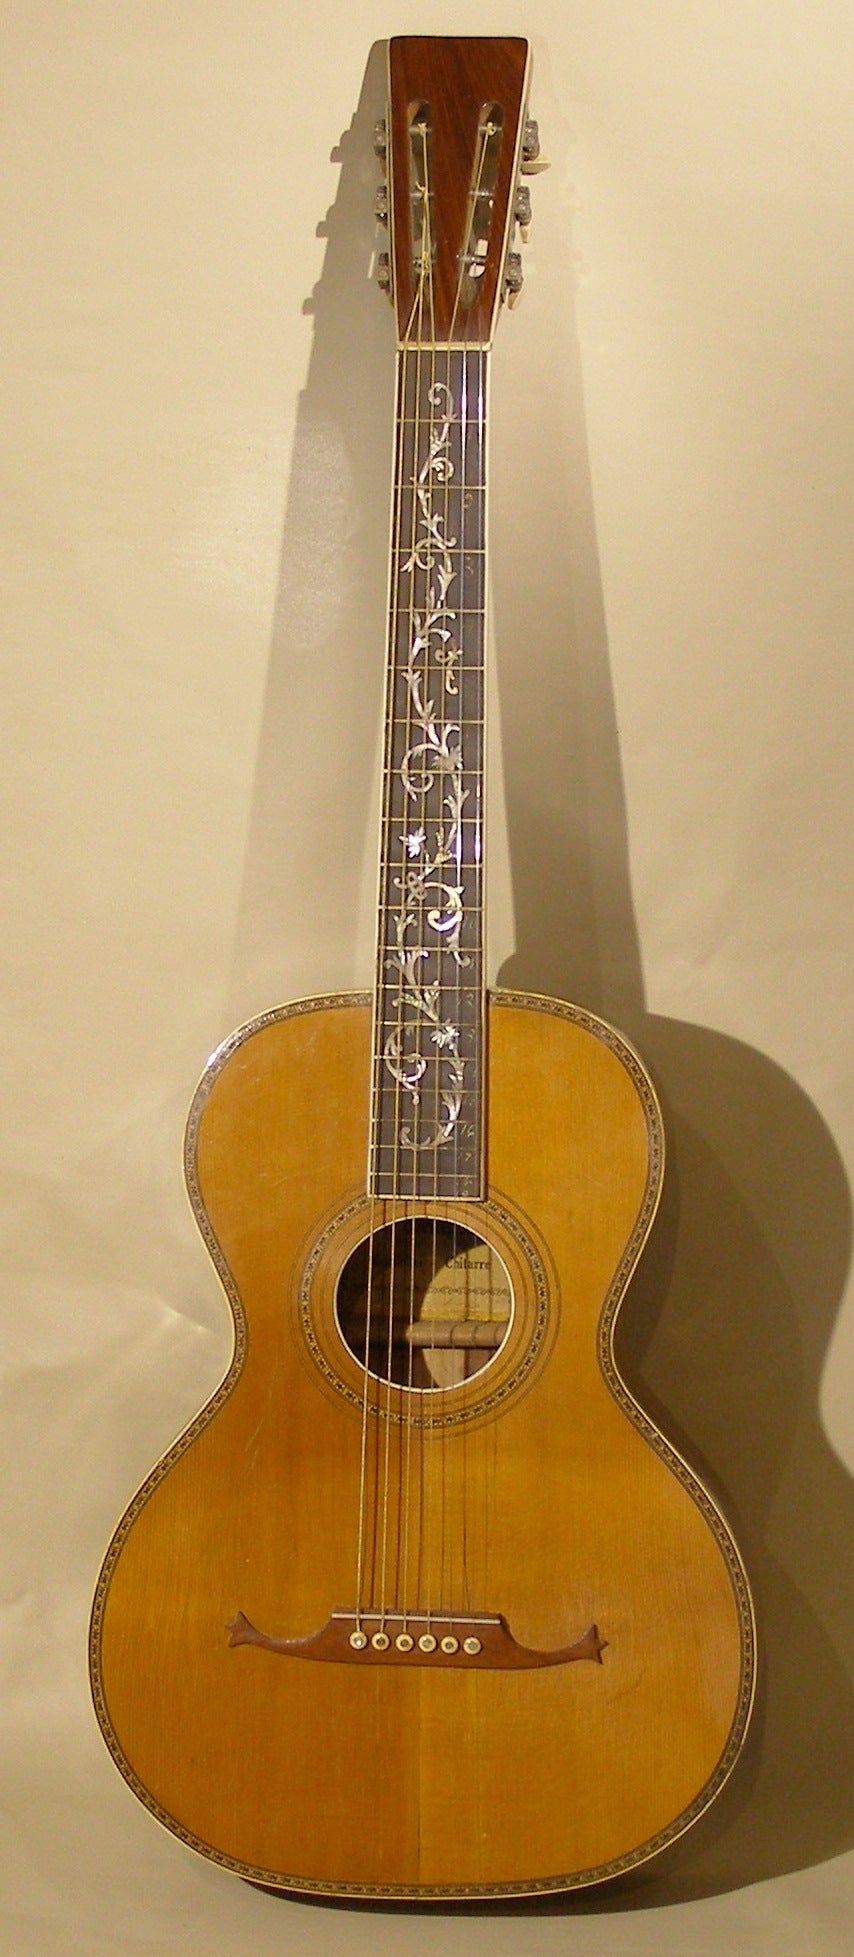 American Inlaid Grand Concert Guitar By A. Galiano